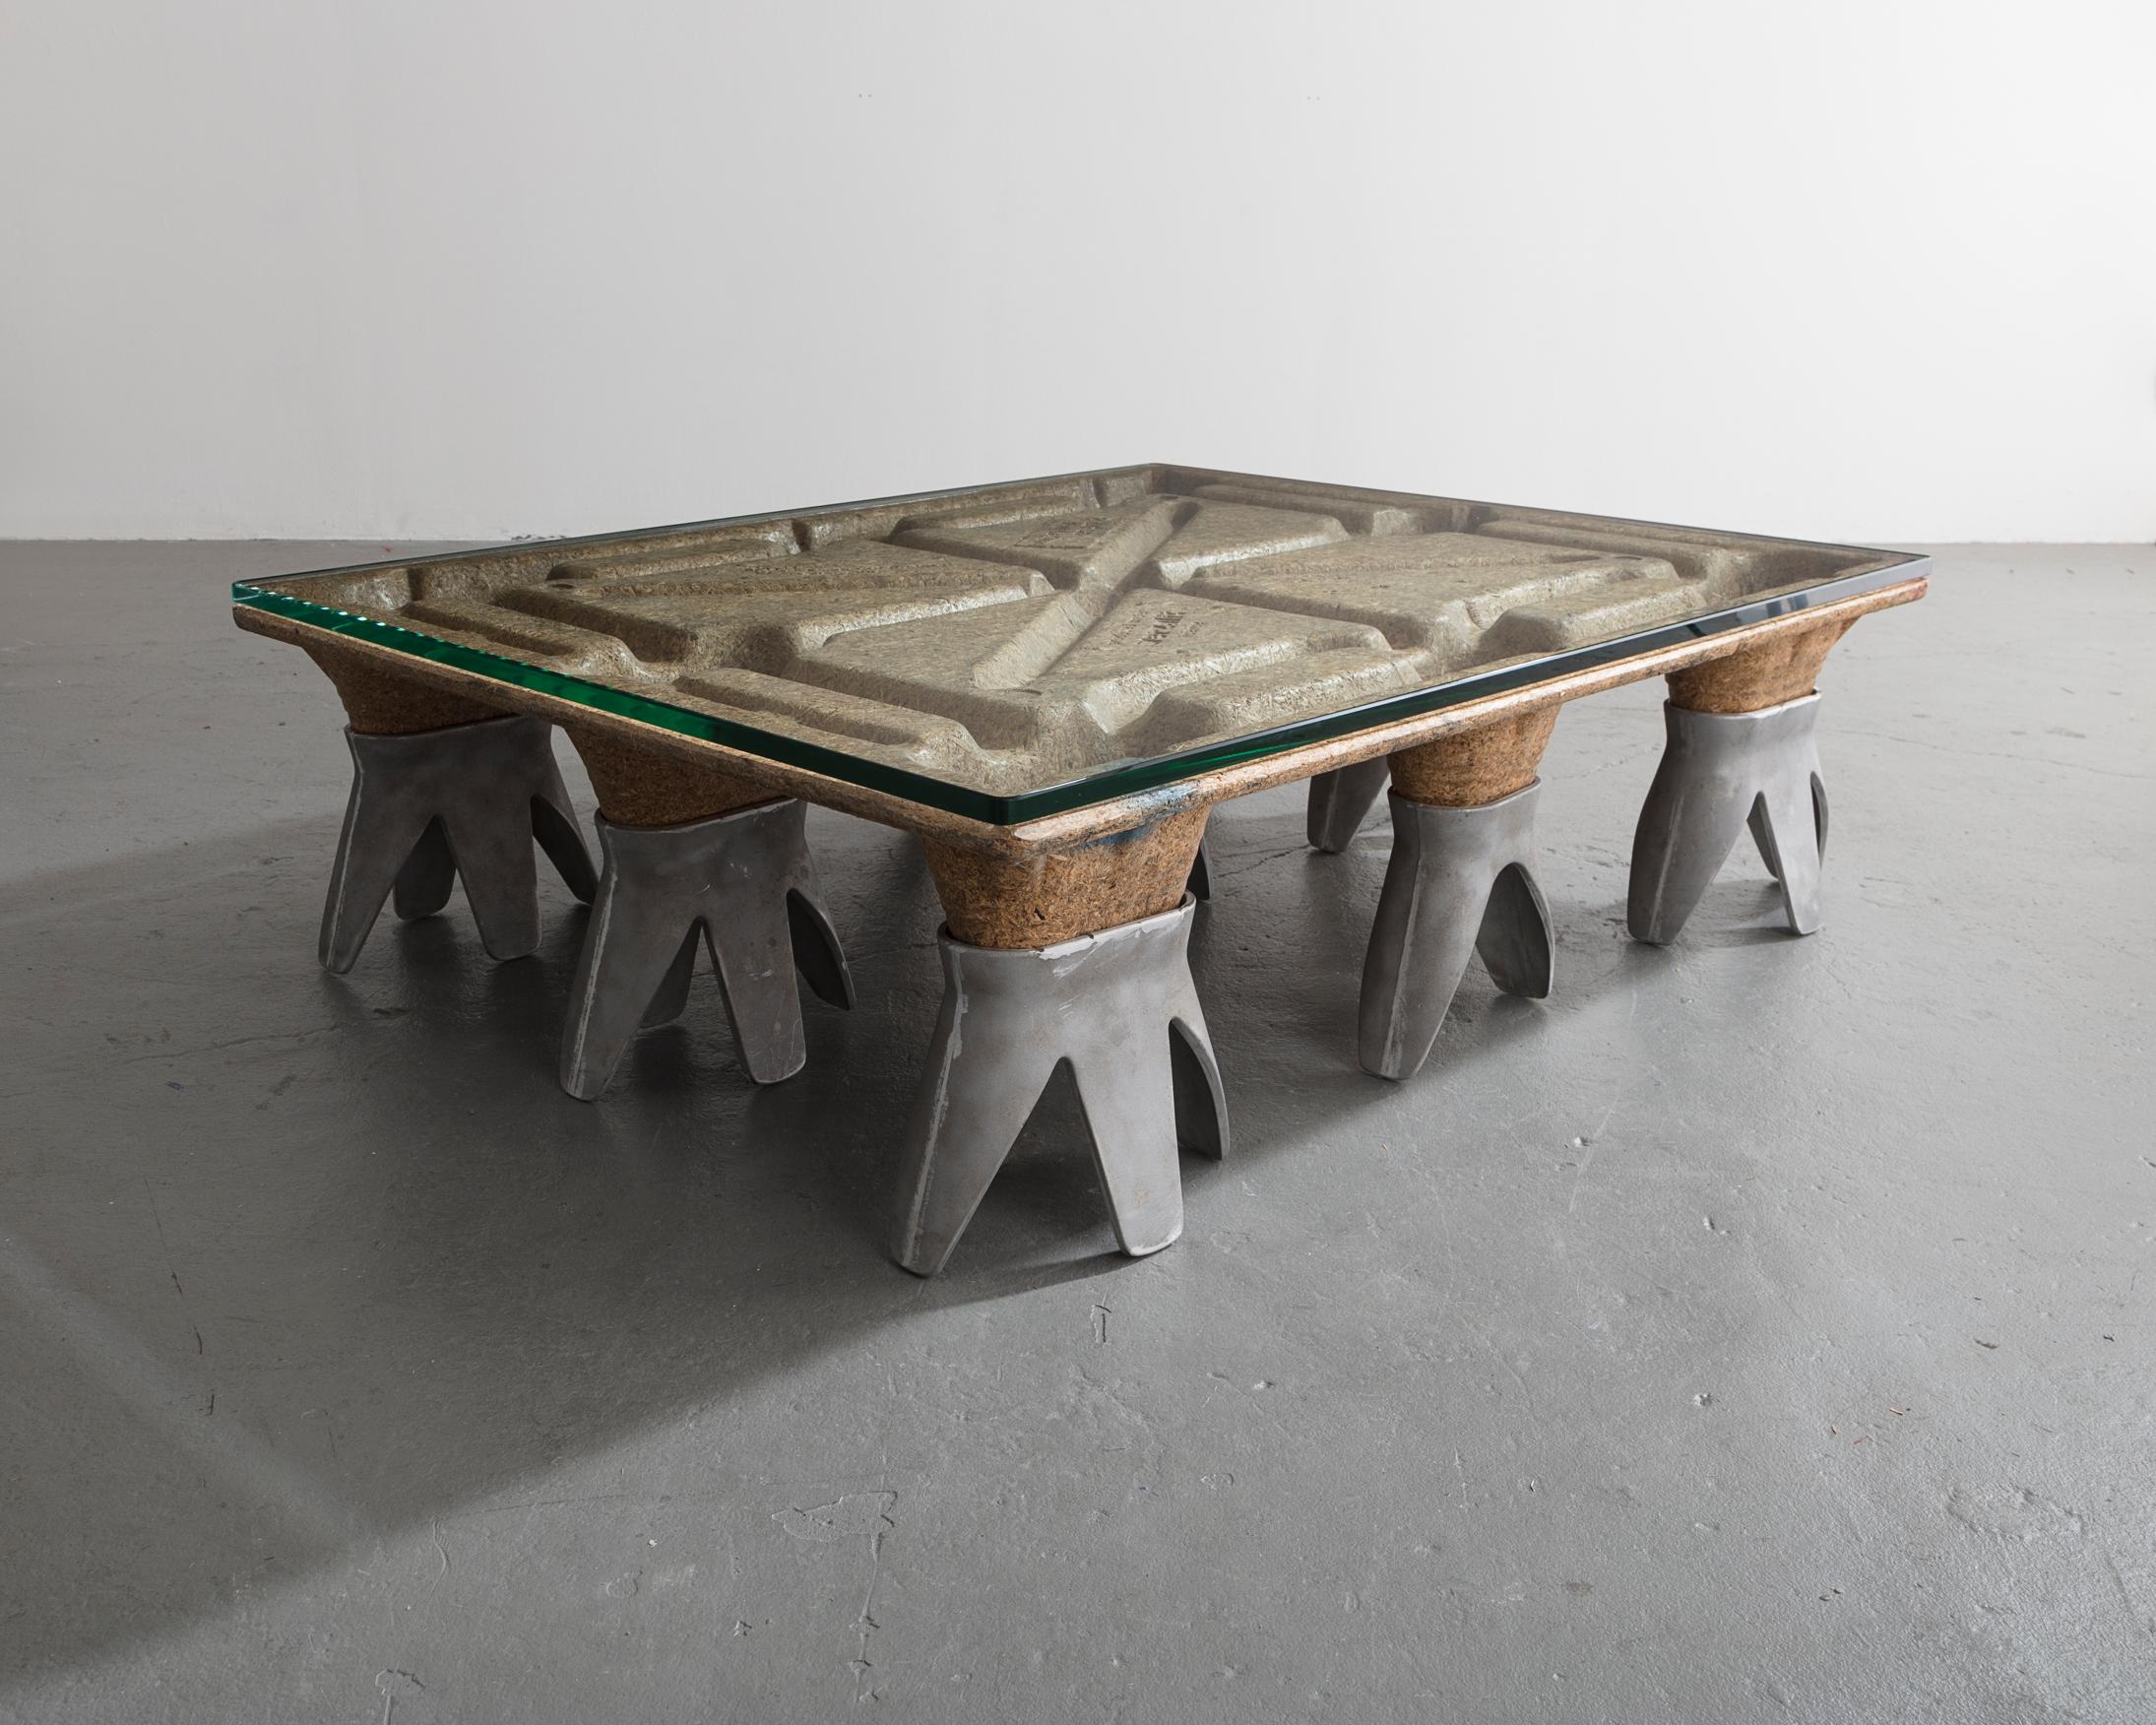 NEA table, Version 1 in particleboard skid, cast aluminum and glass. Designed by Ali Tayar, 1995.